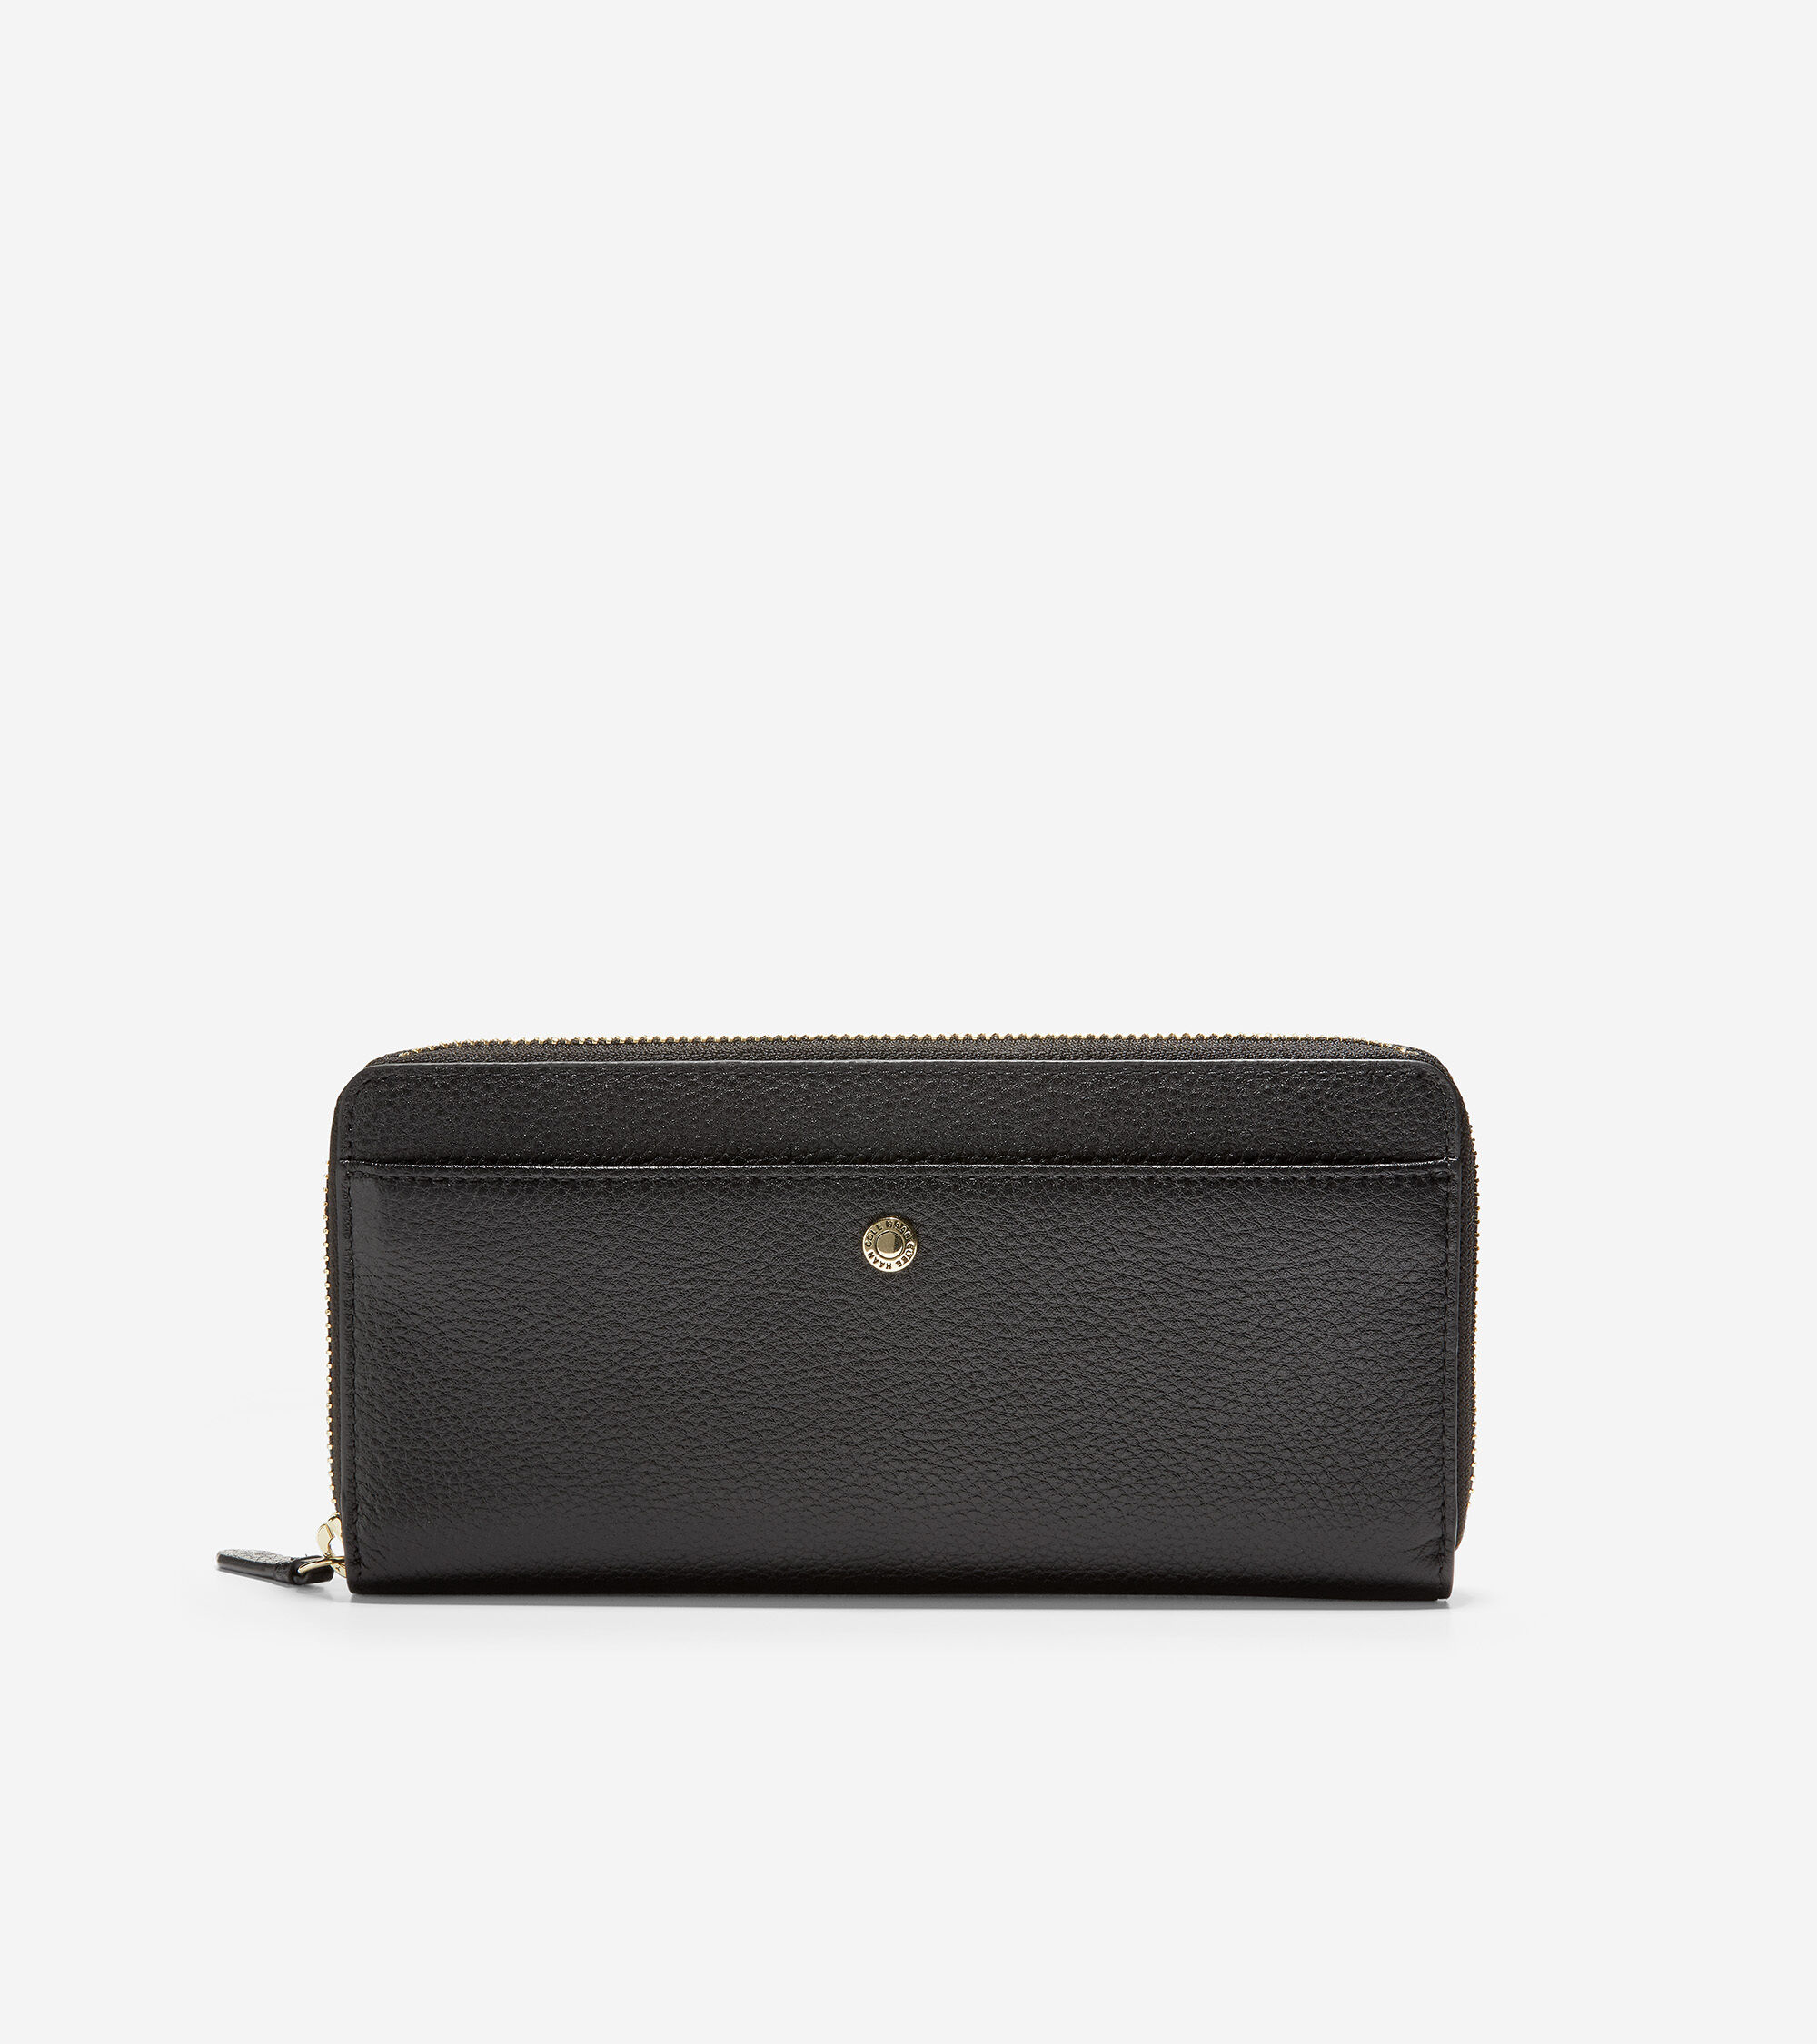 Women's Wallets & Card Cases | Accessories | Cole Haan